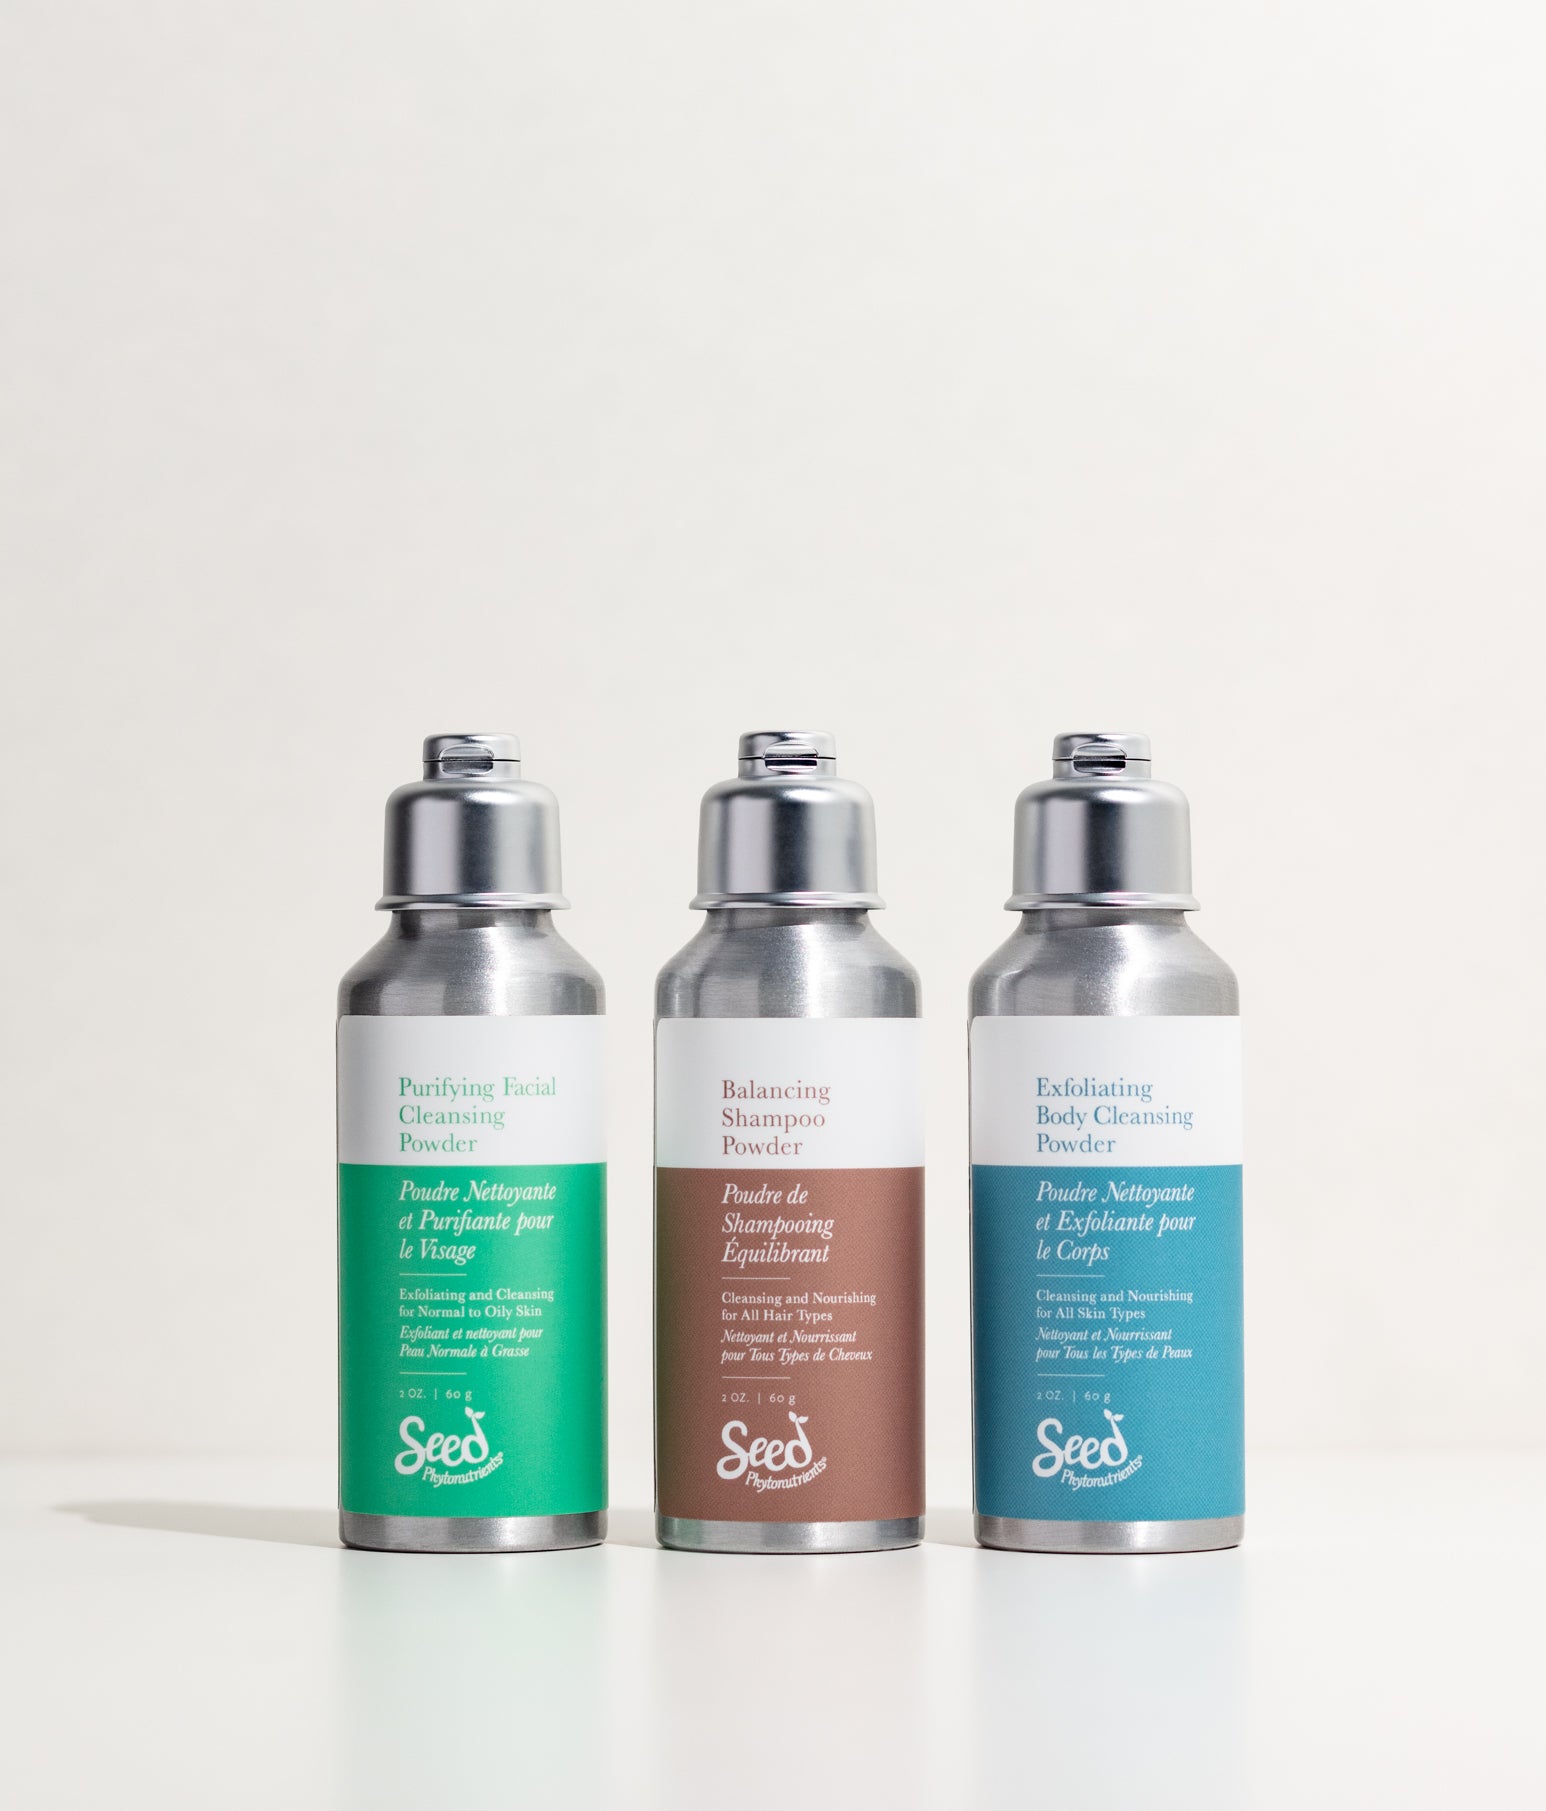 Seed Phytonutrients Cleansing Powder Discovery Set 